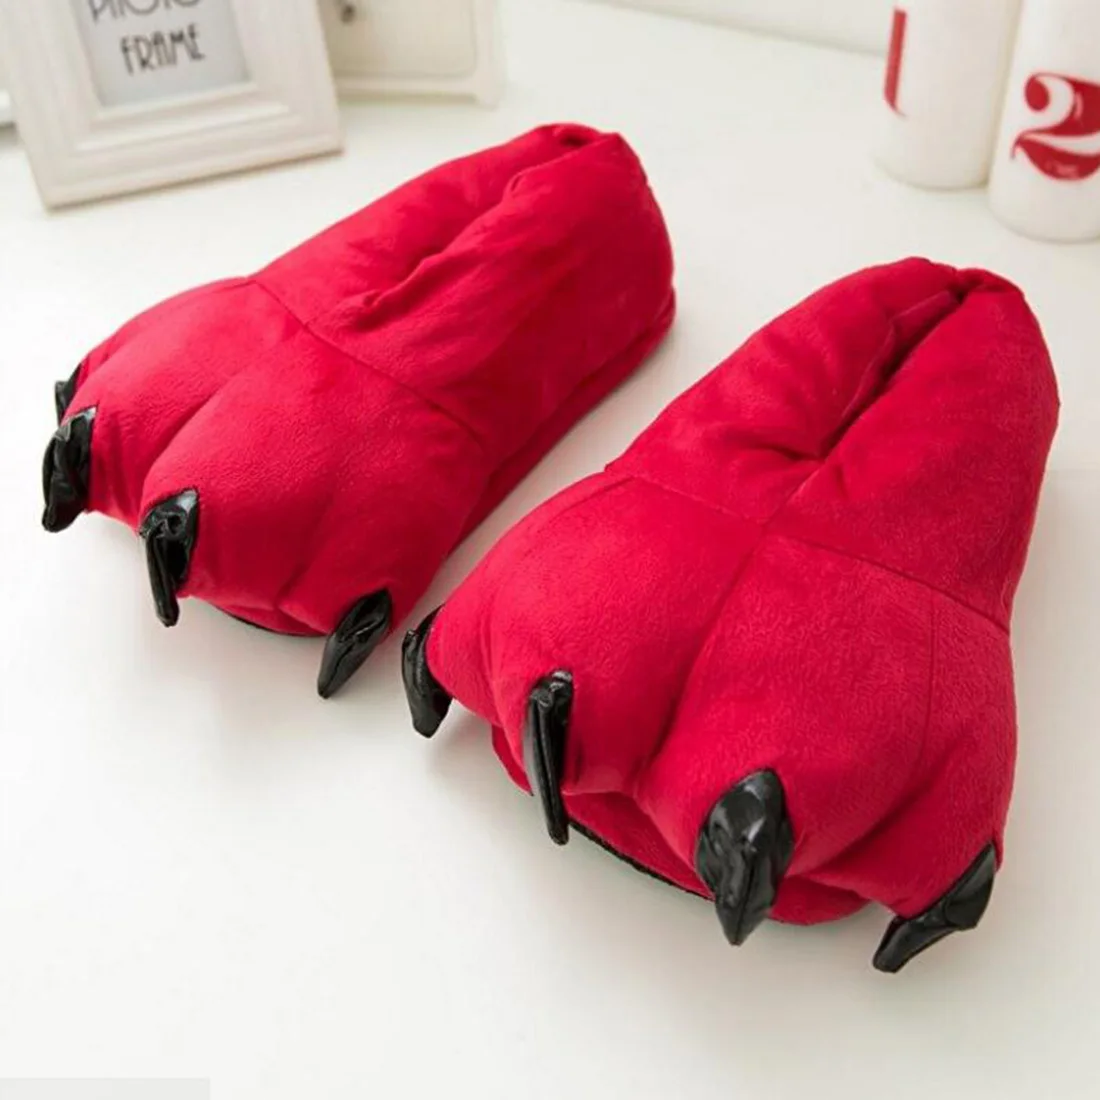 New Design Cartoon Animal Cosplay Costume Slippers Dinosaur Claw Paw Shoe indoor Children Women Men Cute Home Slippers Plus Size - Color: Red